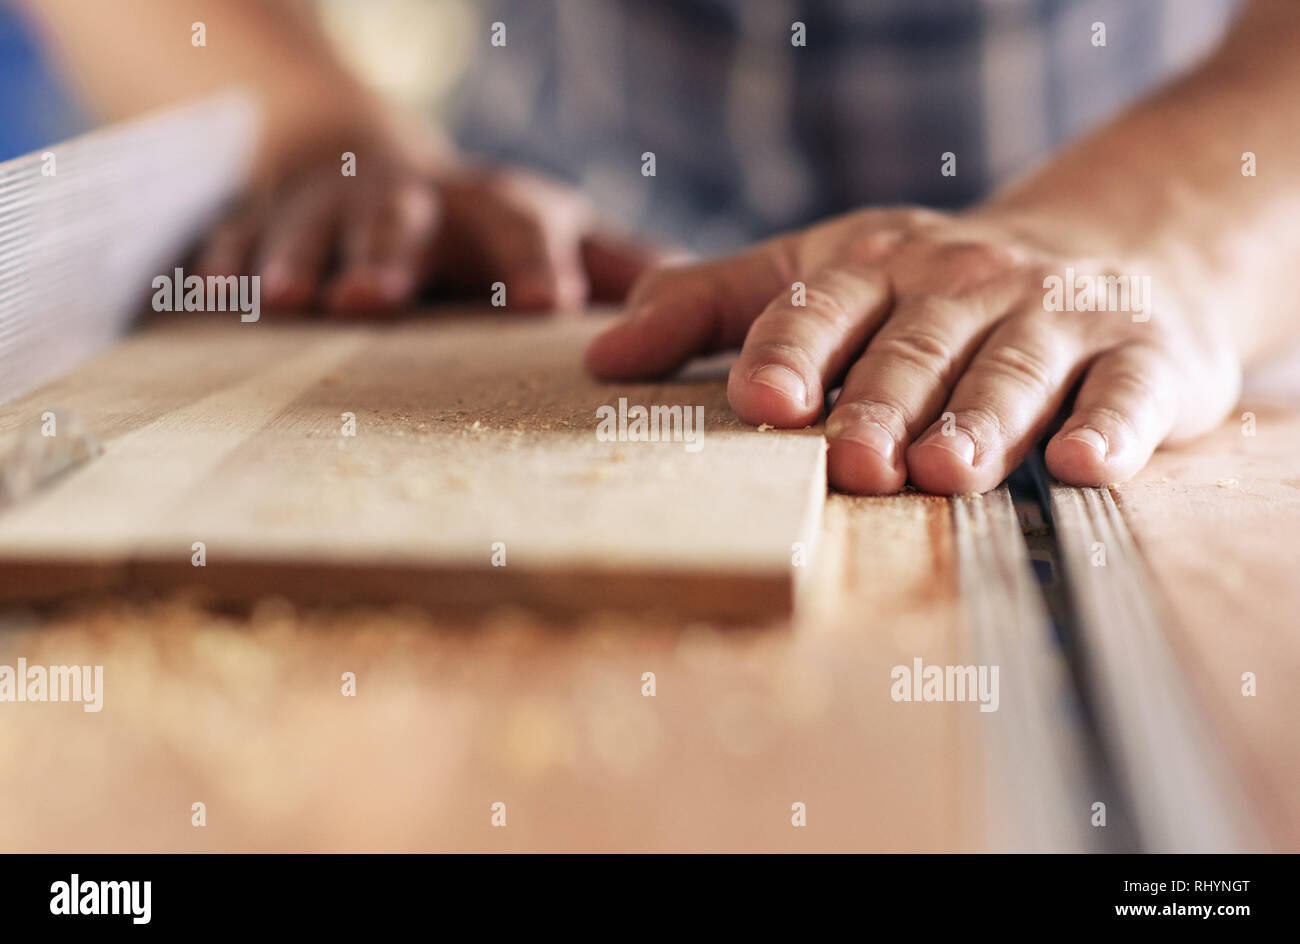 Craftsman sawing planks of wood in his carpentry workshop Stock Photo